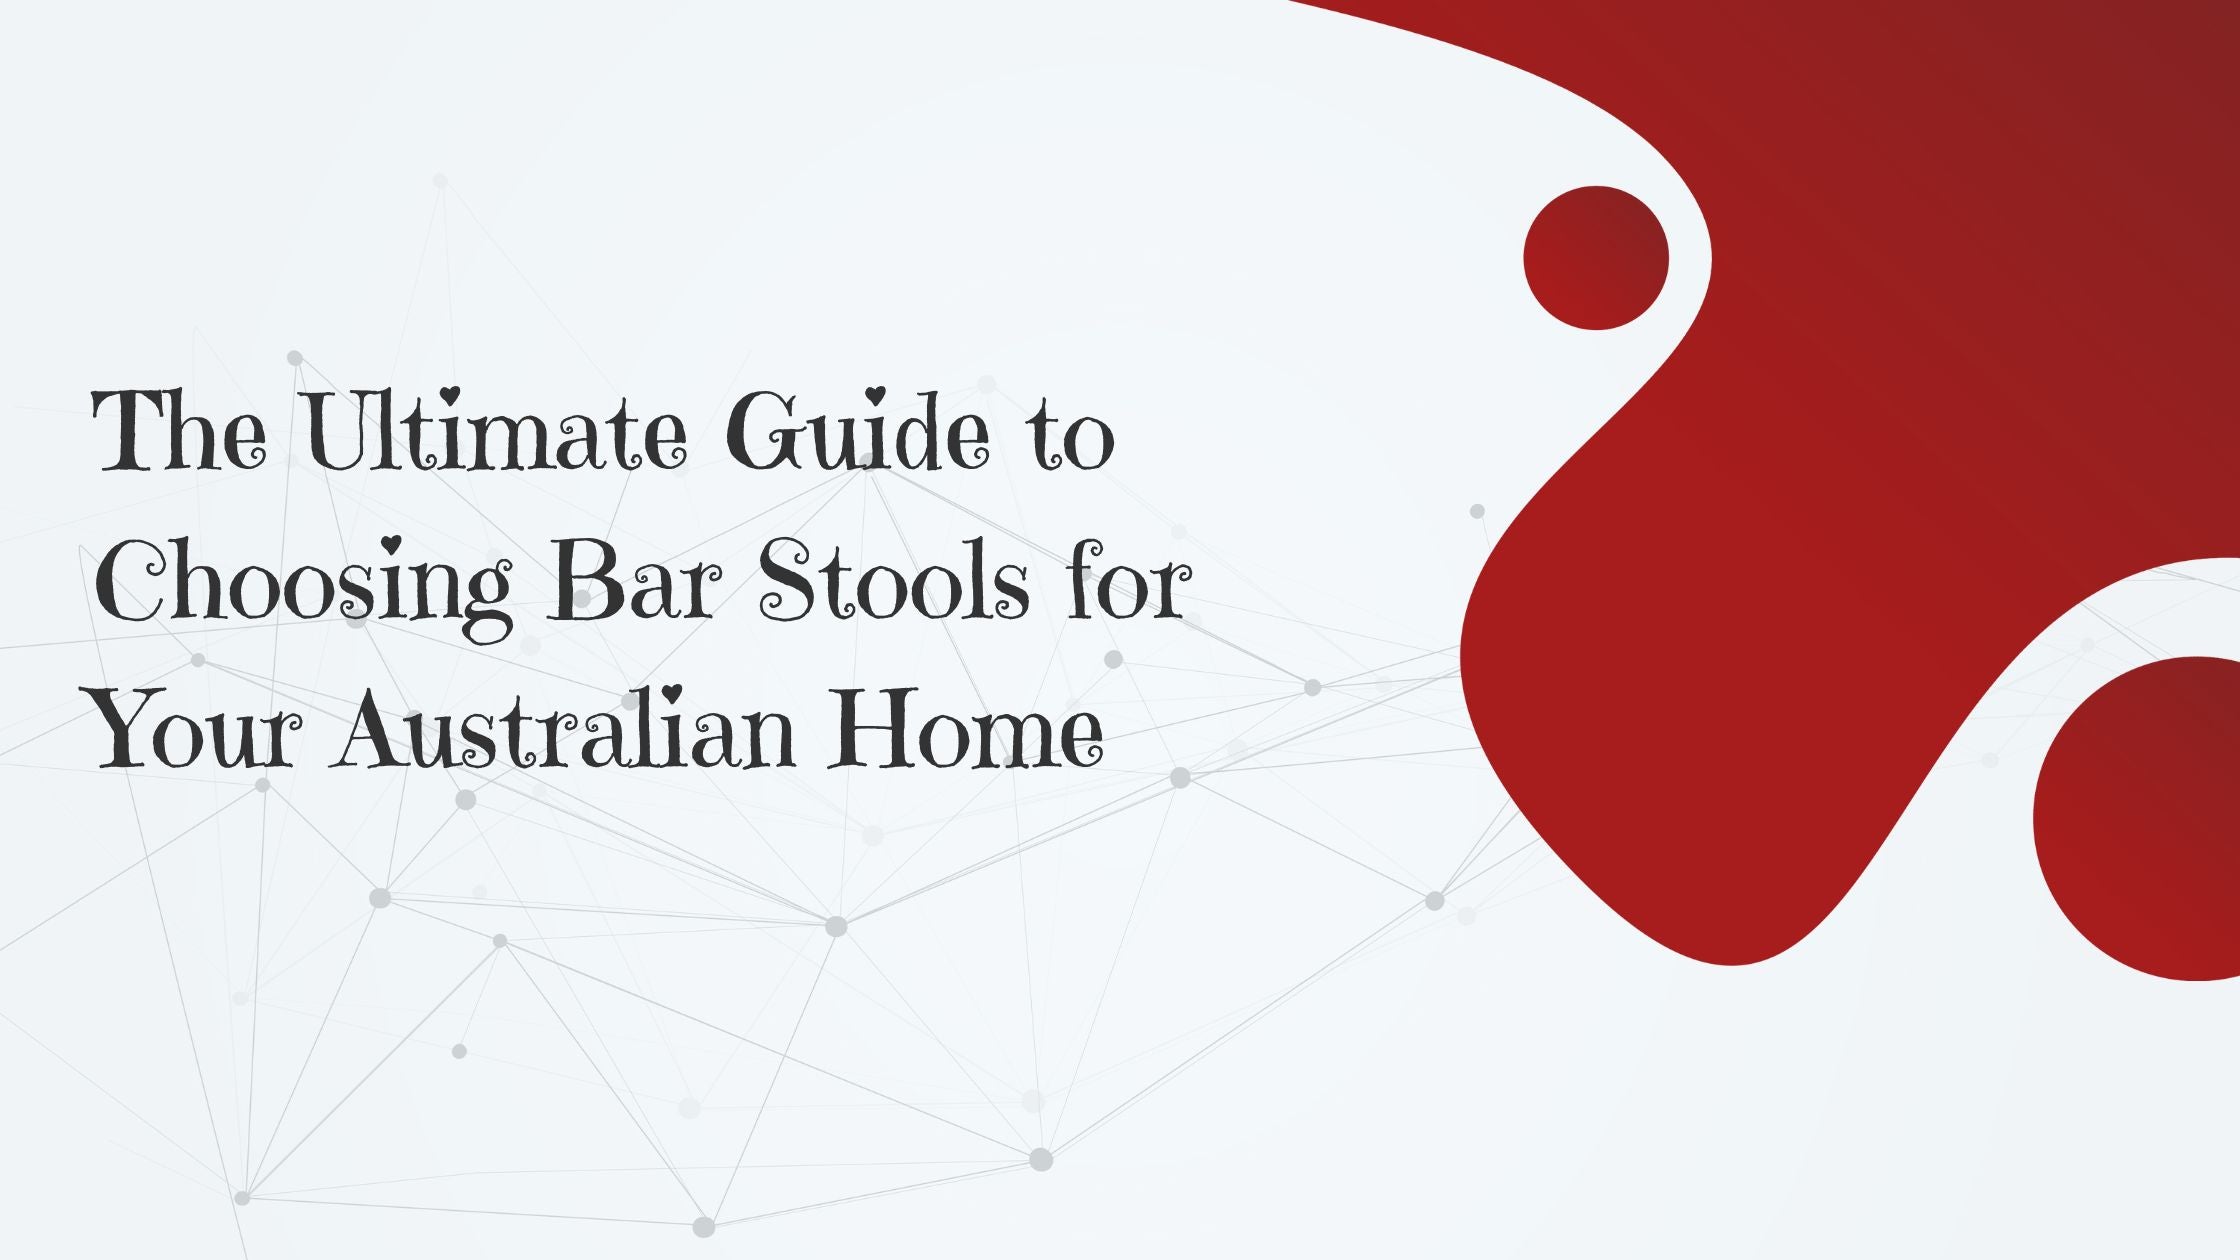 The Ultimate Guide to Choosing Bar Stools for Your Australian Home